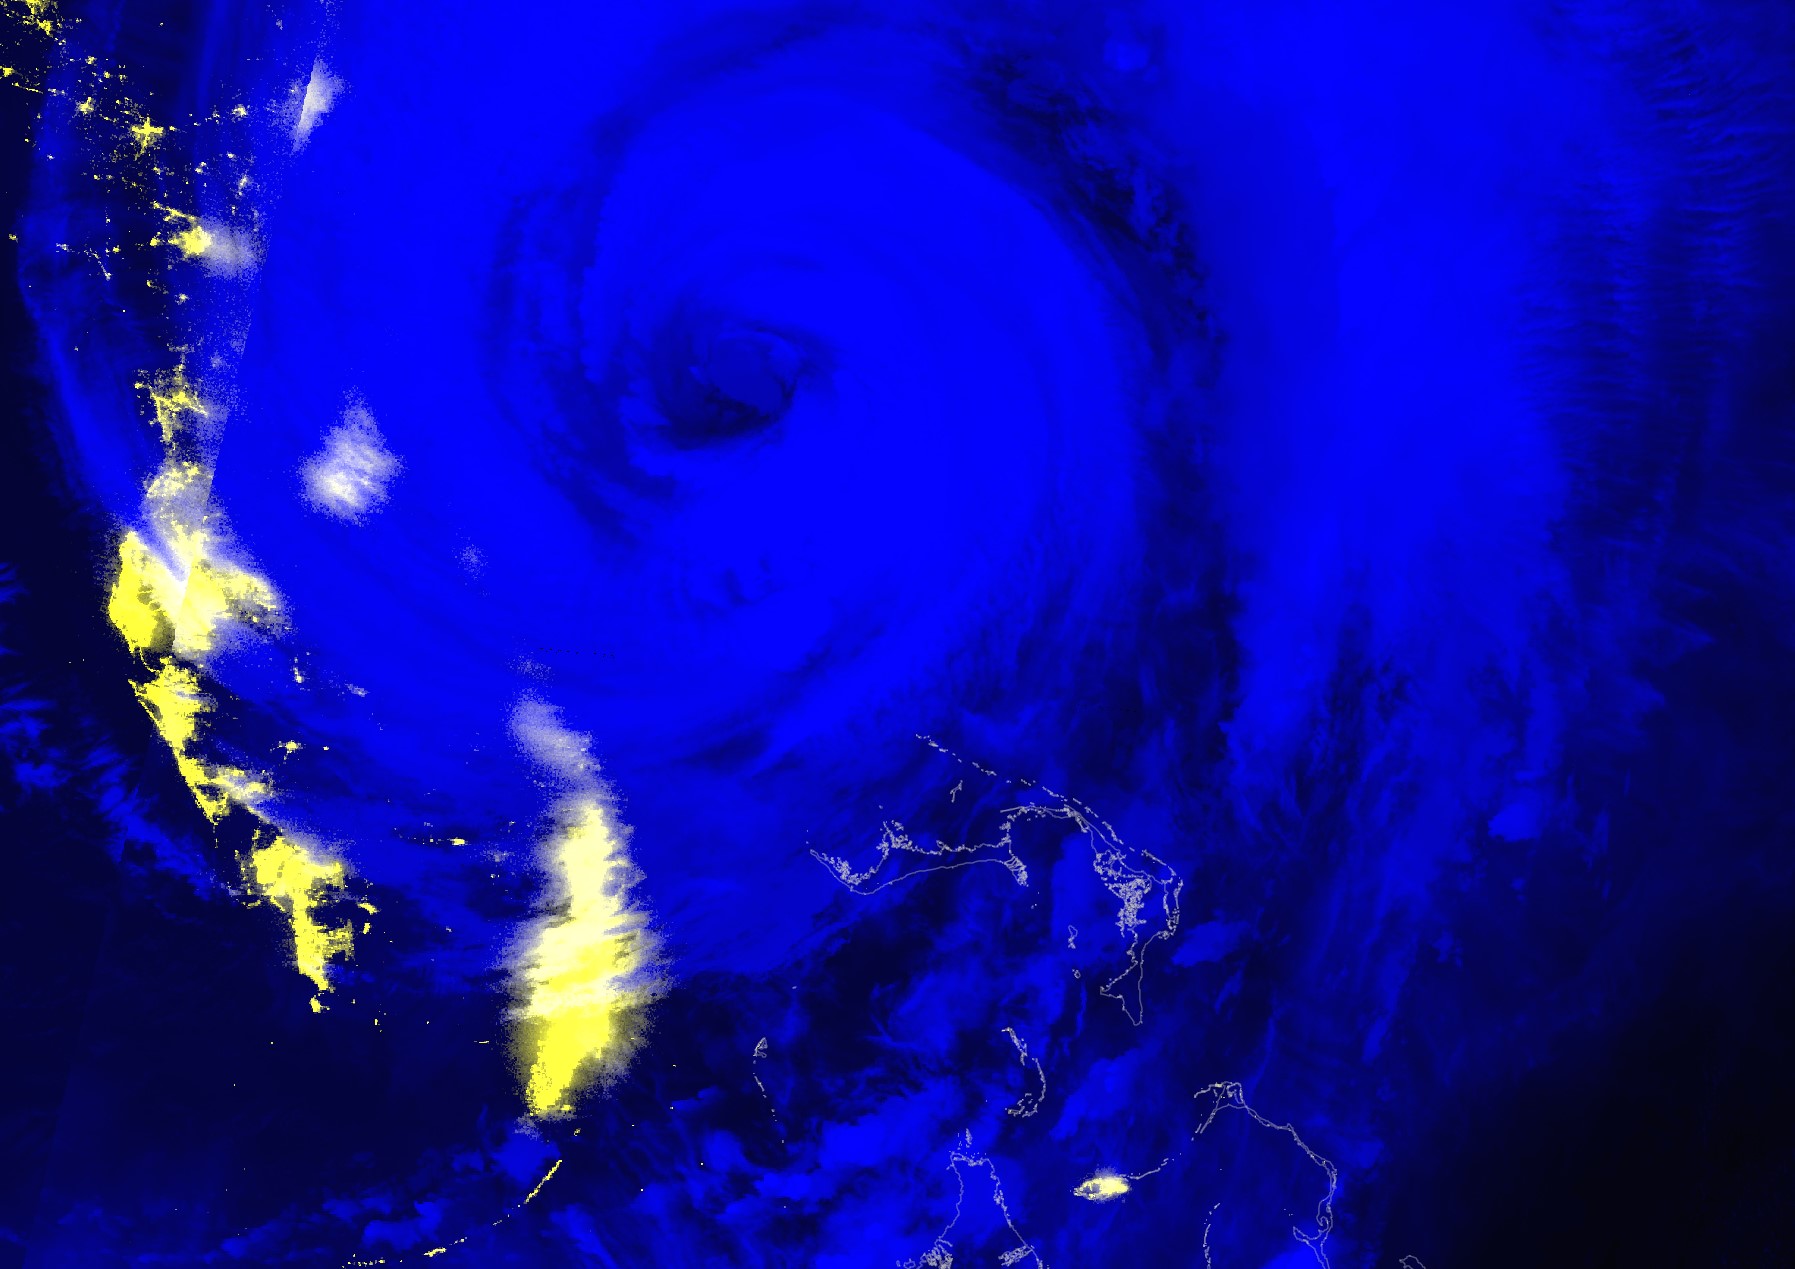 This Black Marble Nighttime Blue/Yellow Composite image shows Hurricane Dorian just after it moved away from the Bahamas on September 4, 2019.